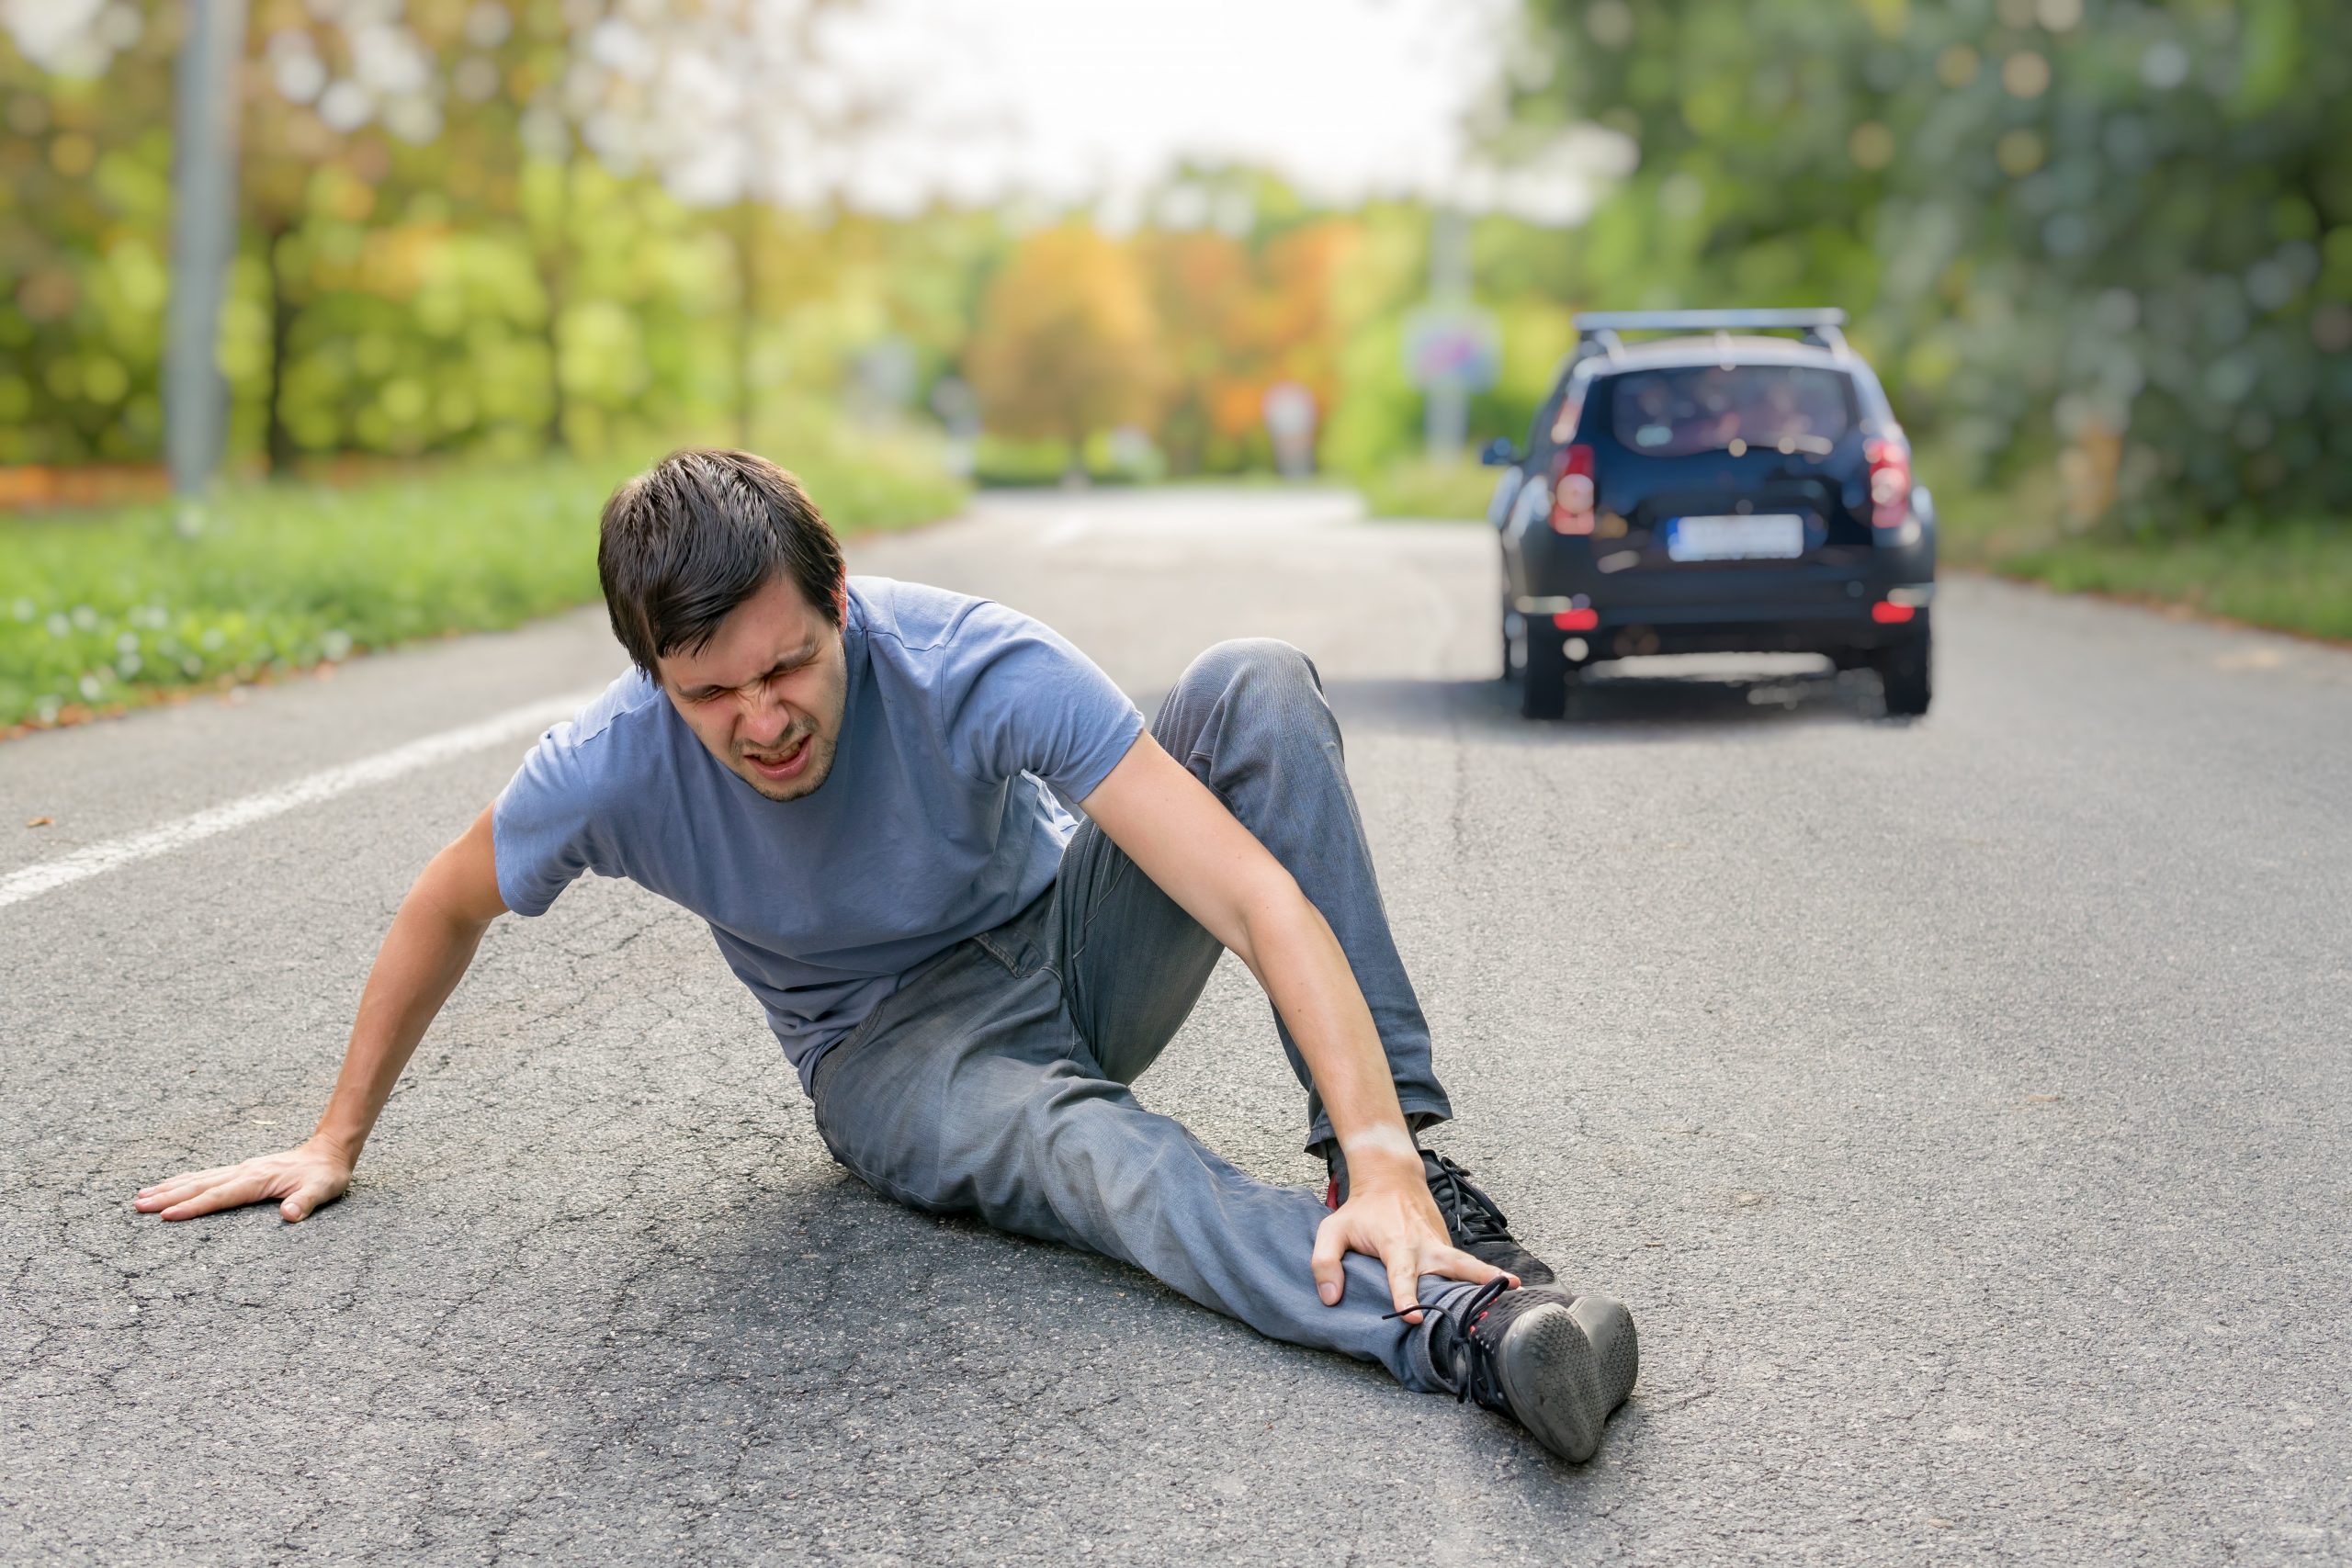 Hit and Runs in New York: What to Do if You’re a Victim